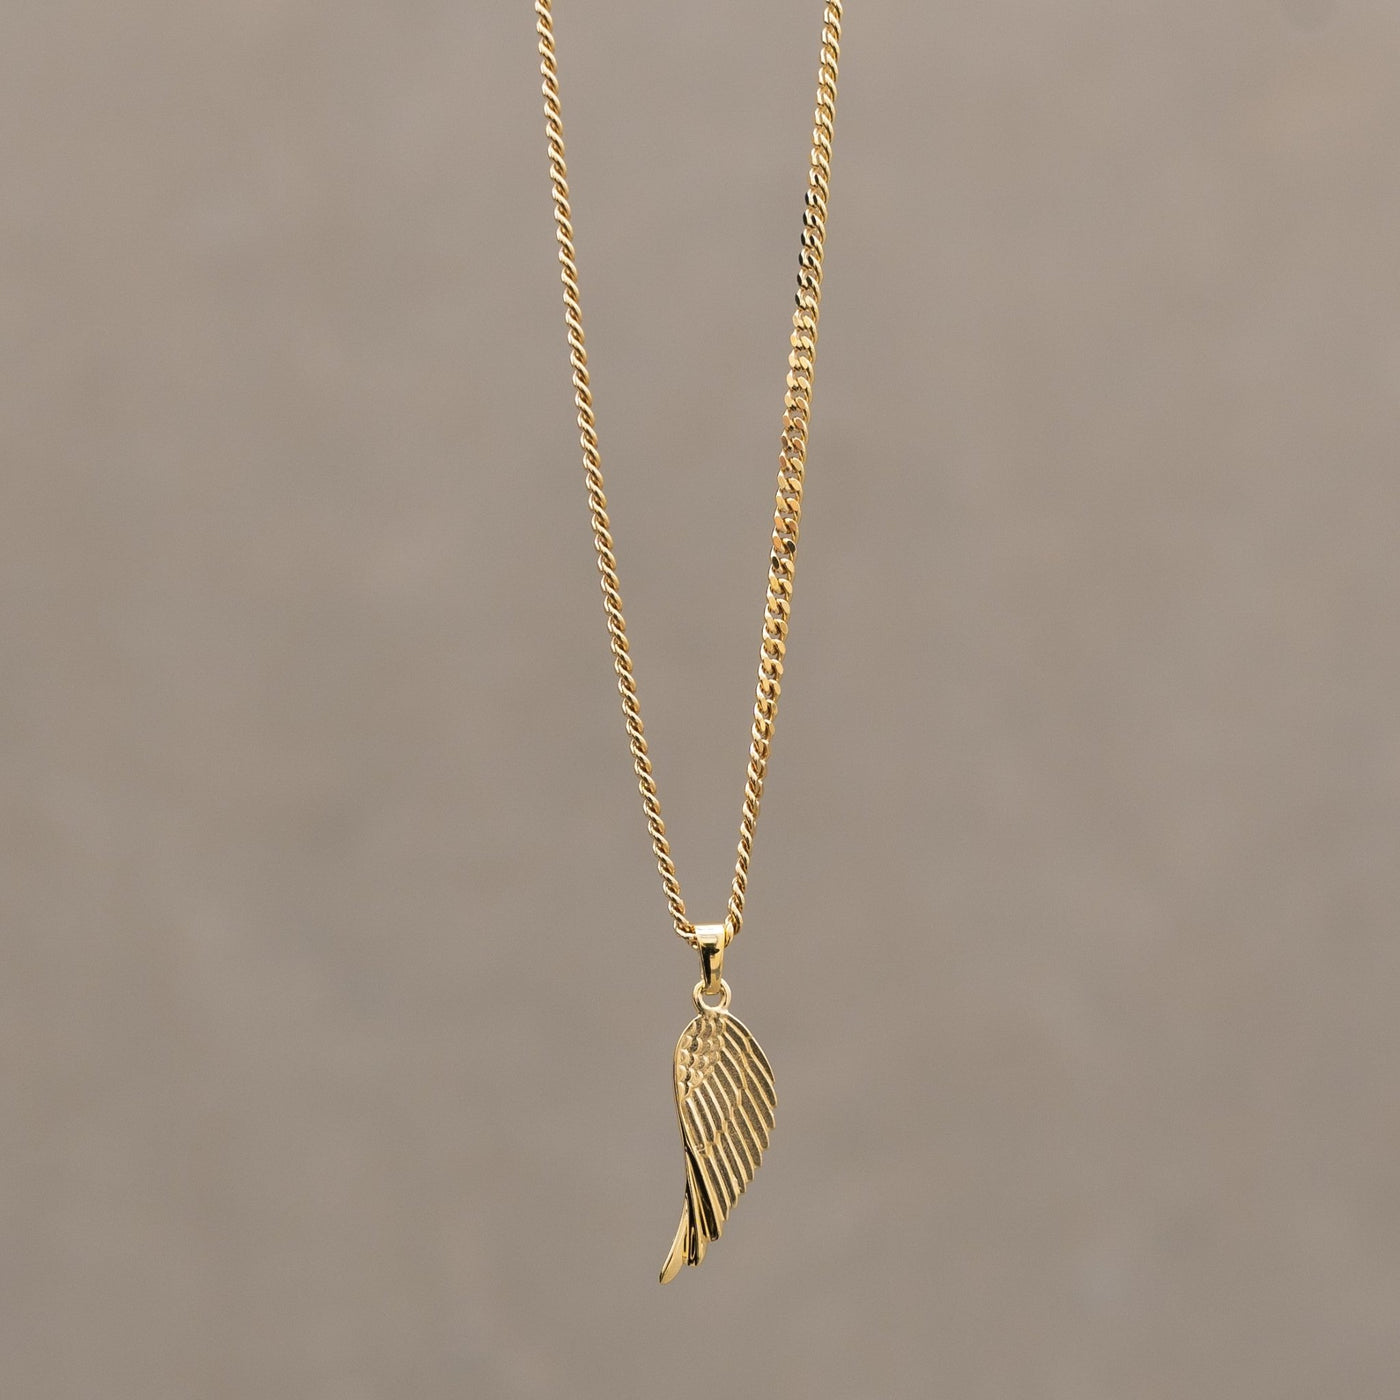 WING NECKLACE 925 SILVER 18K GOLD PLATED - IDENTIM®